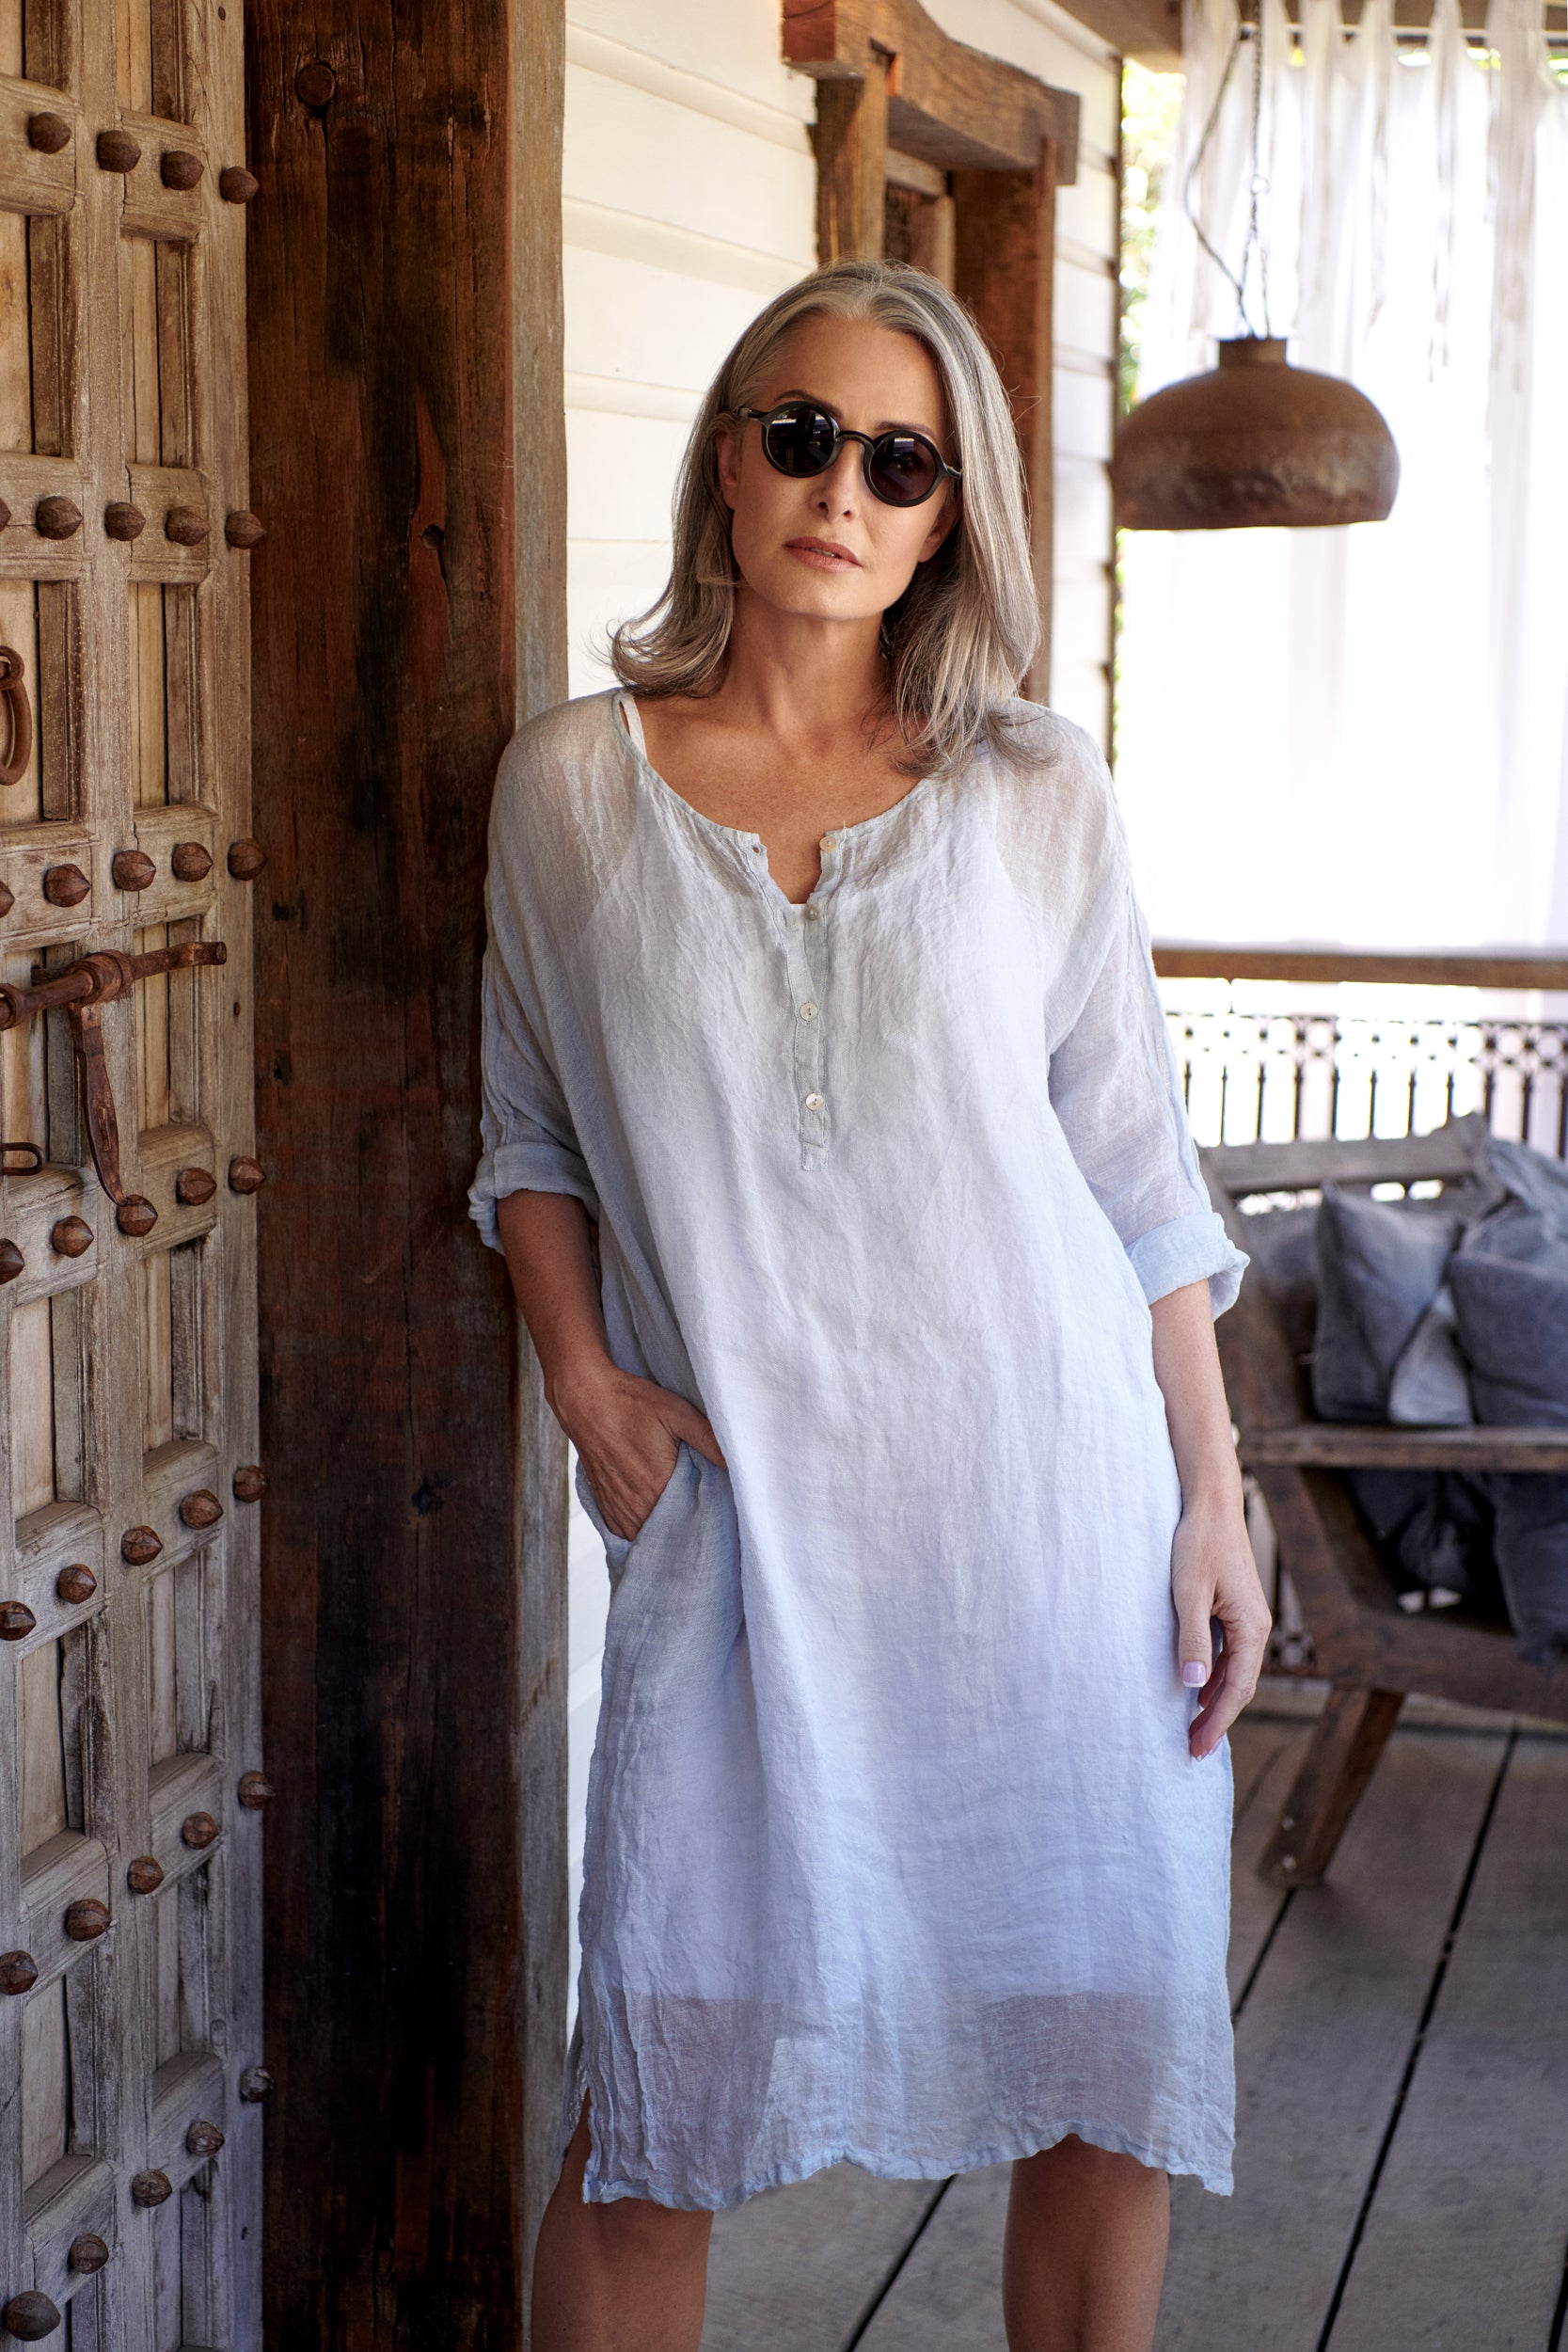 A MegbyDesign model is wearing a mid length white linen dress in white which features side pockets and double stitching